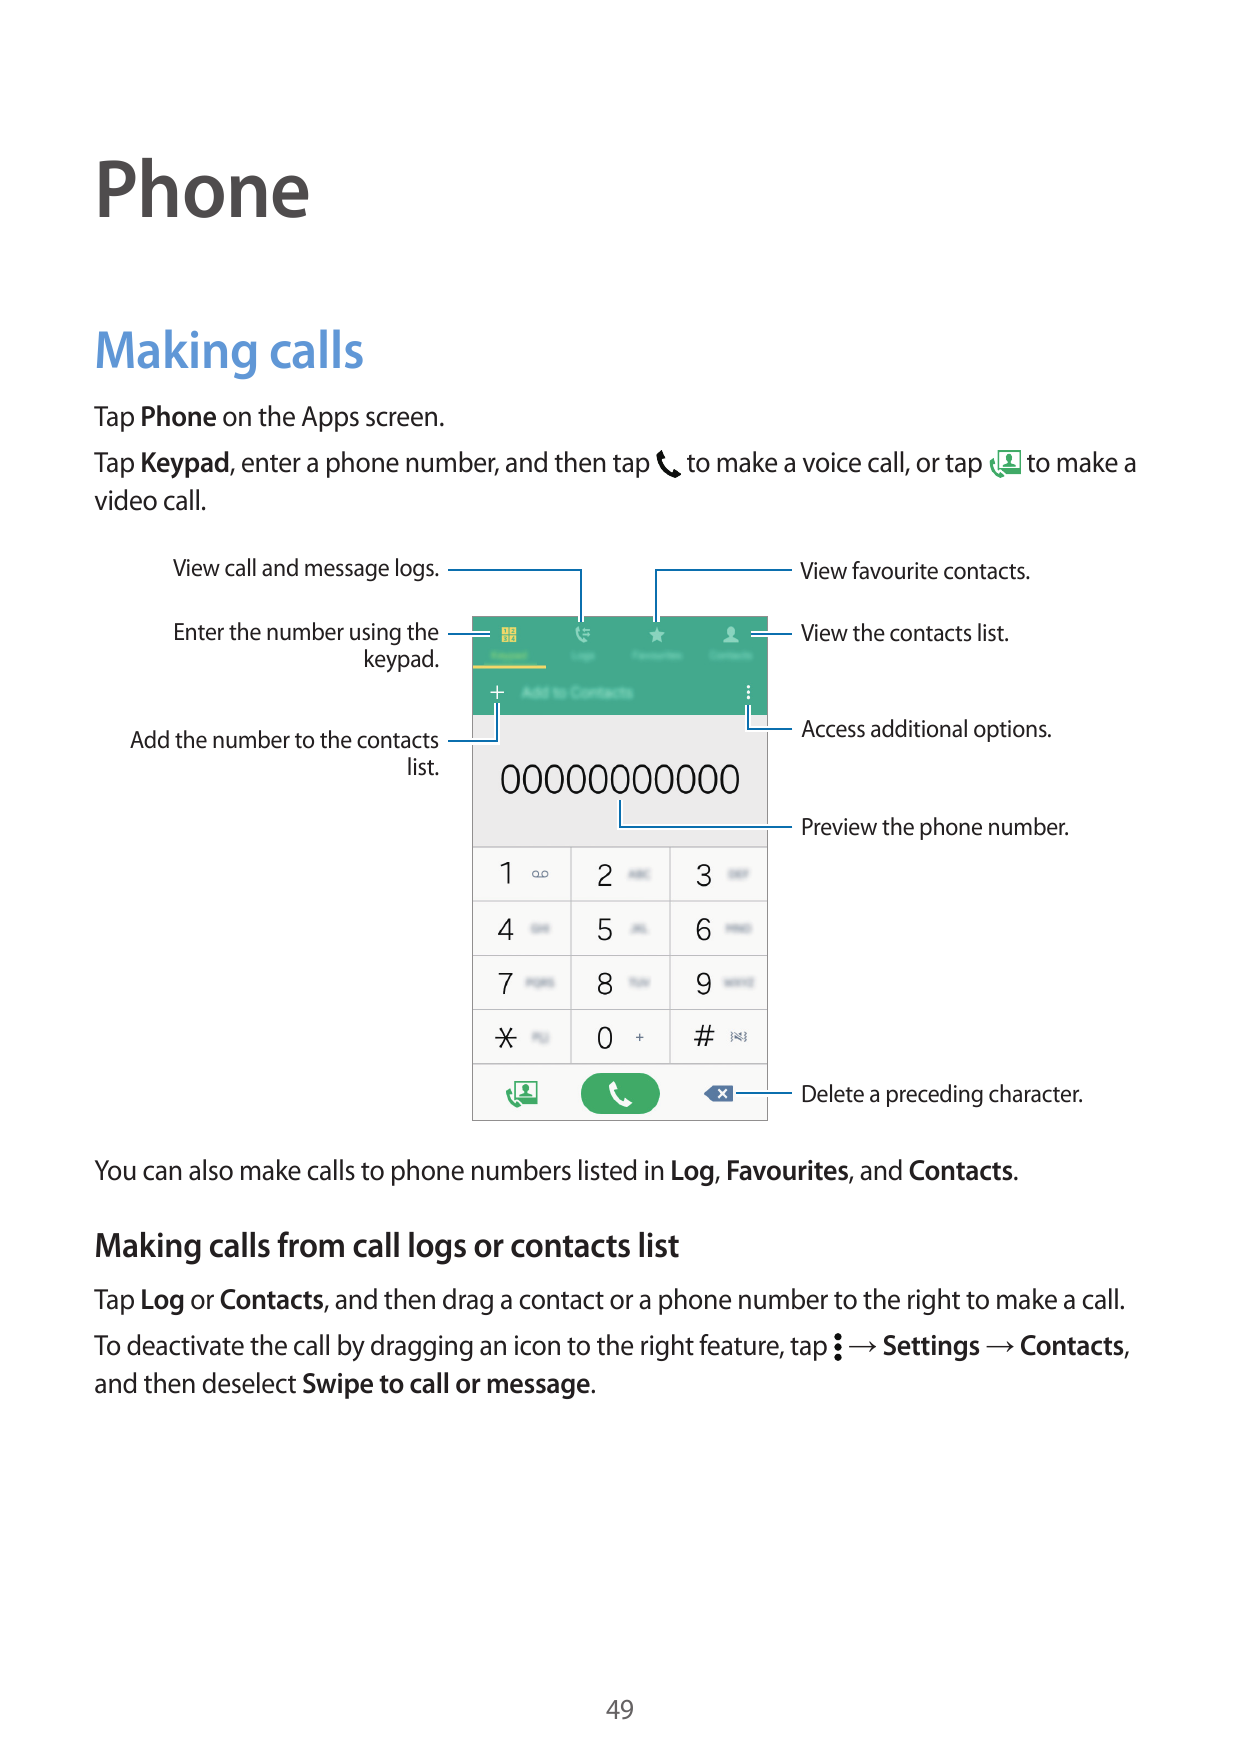 PhoneMaking callsTap Phone on the Apps screen.Tap Keypad, enter a phone number, and then tapvideo call.to make a voice call, or 